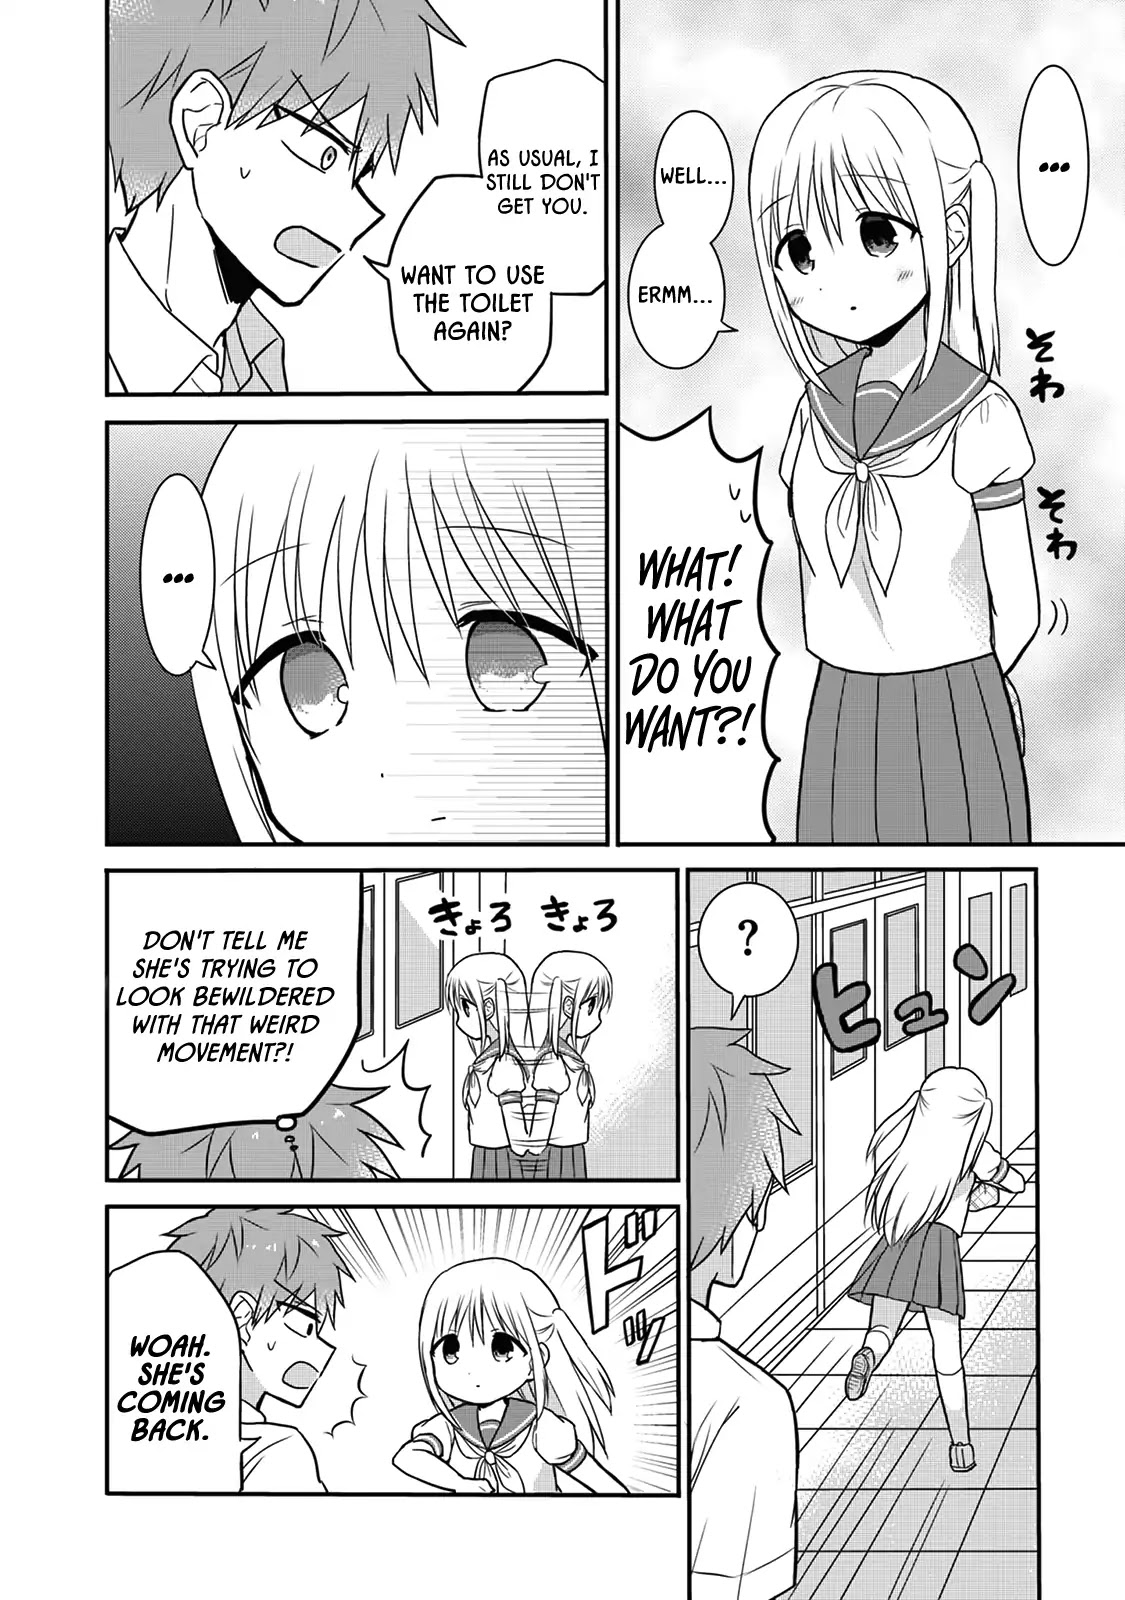 Expressionless Face Girl and Emotional Face Boy Chapter 6: Oota-kun's Lunch